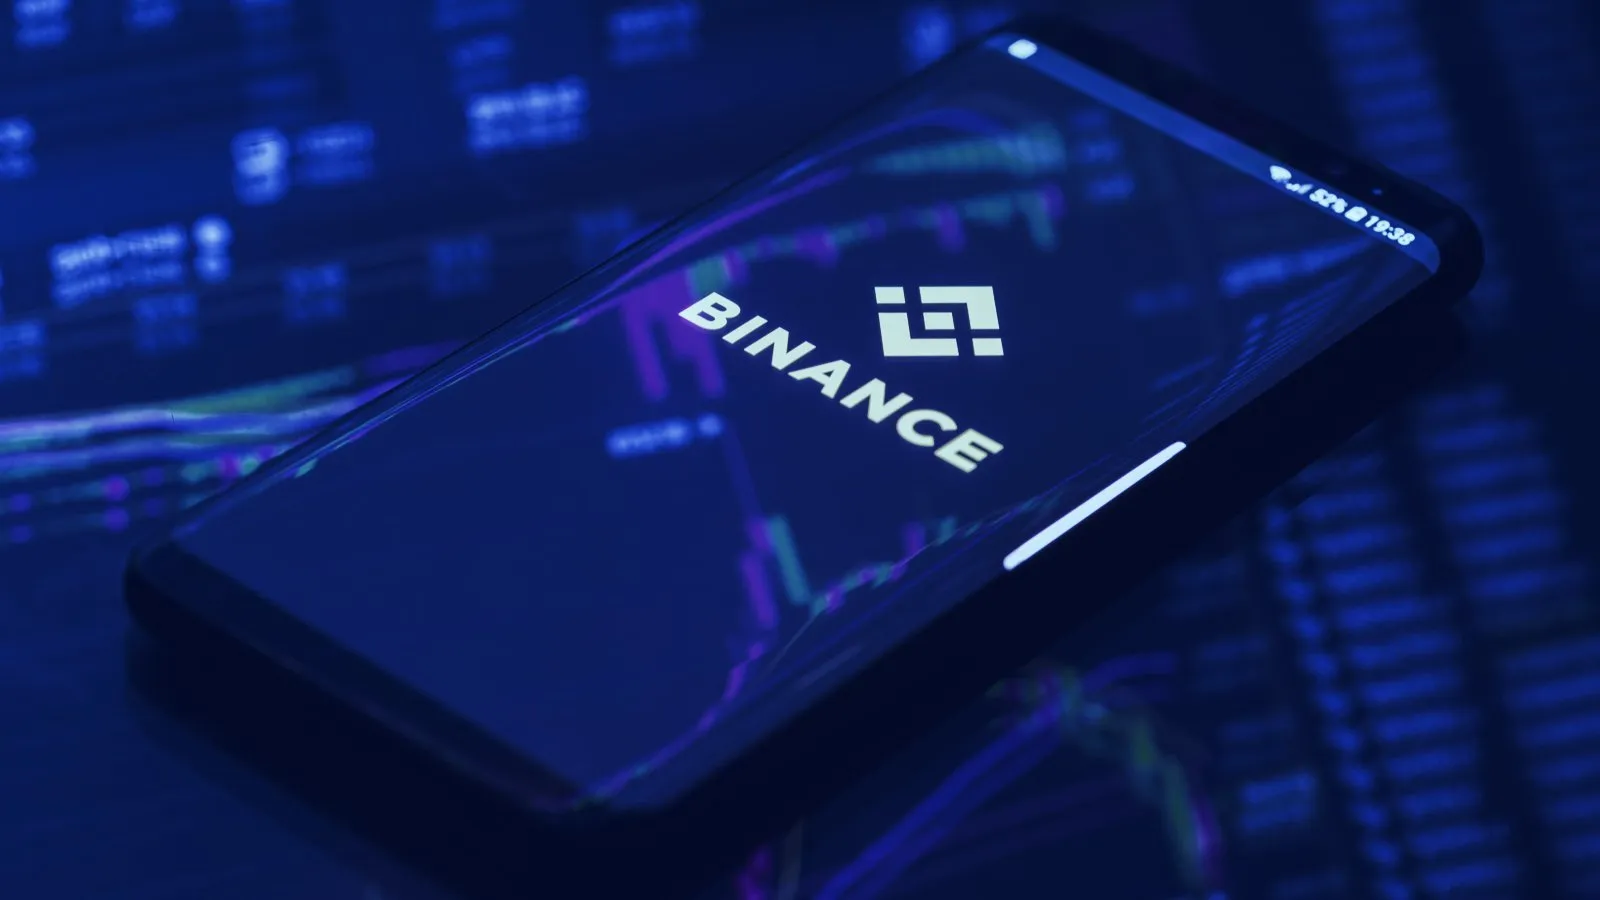 Binance is one of the largest crypto exchanges in the world. Image: Shutterstock